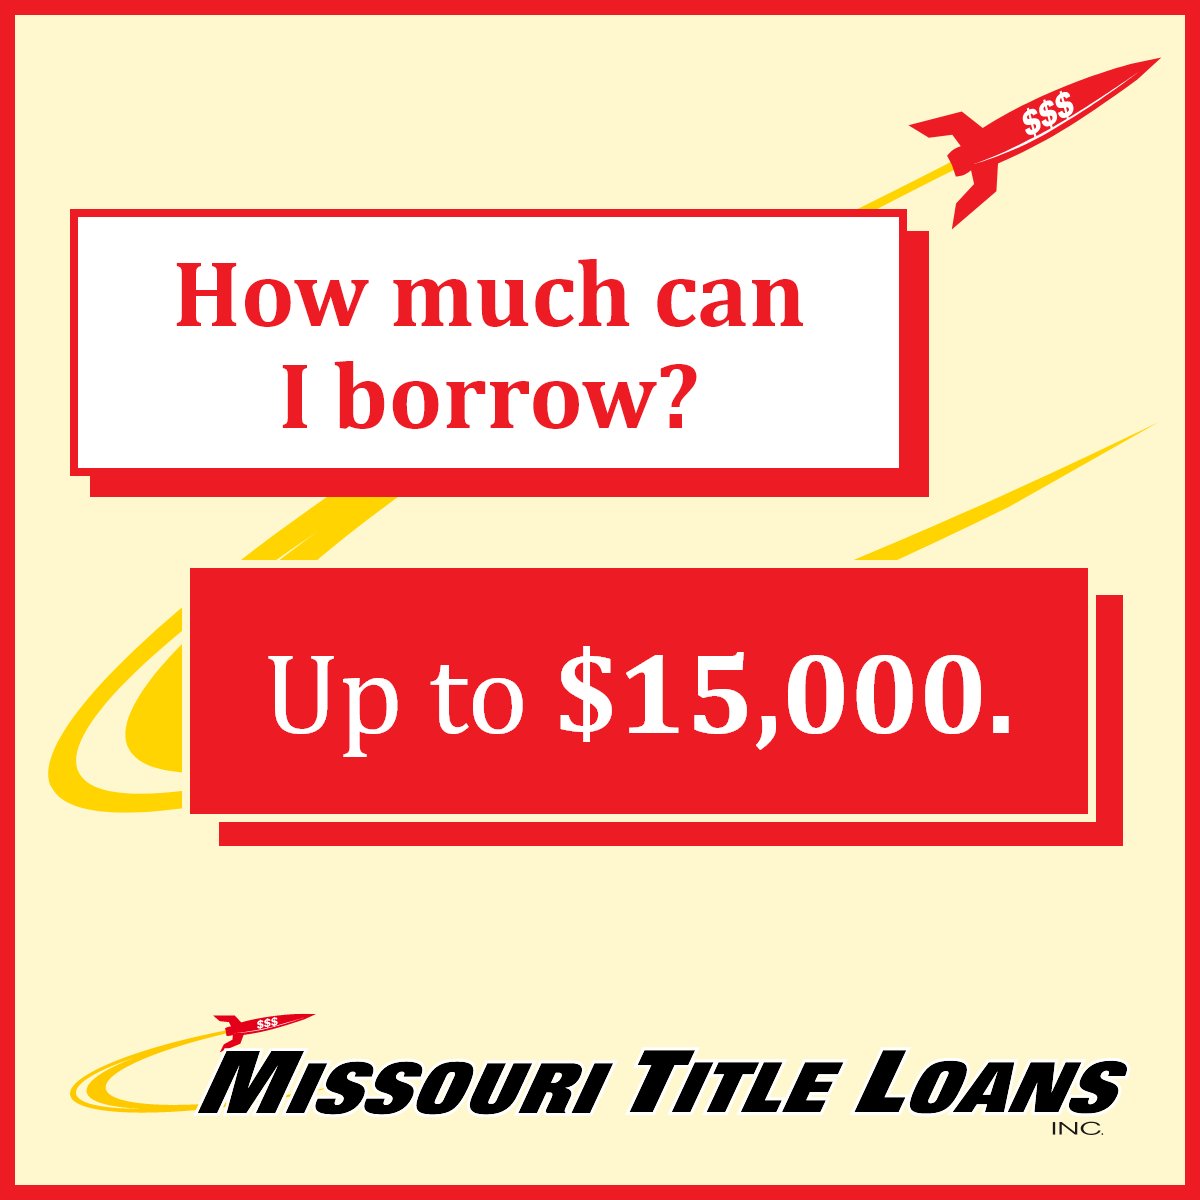 💰 That's right! You could get up to $15,000 cash with a fast loan from us. Log on to our website to get the fast cash you need today: missourititleloansinc.com 

#fastcash #cashloans #fastloans #missouriloansonline